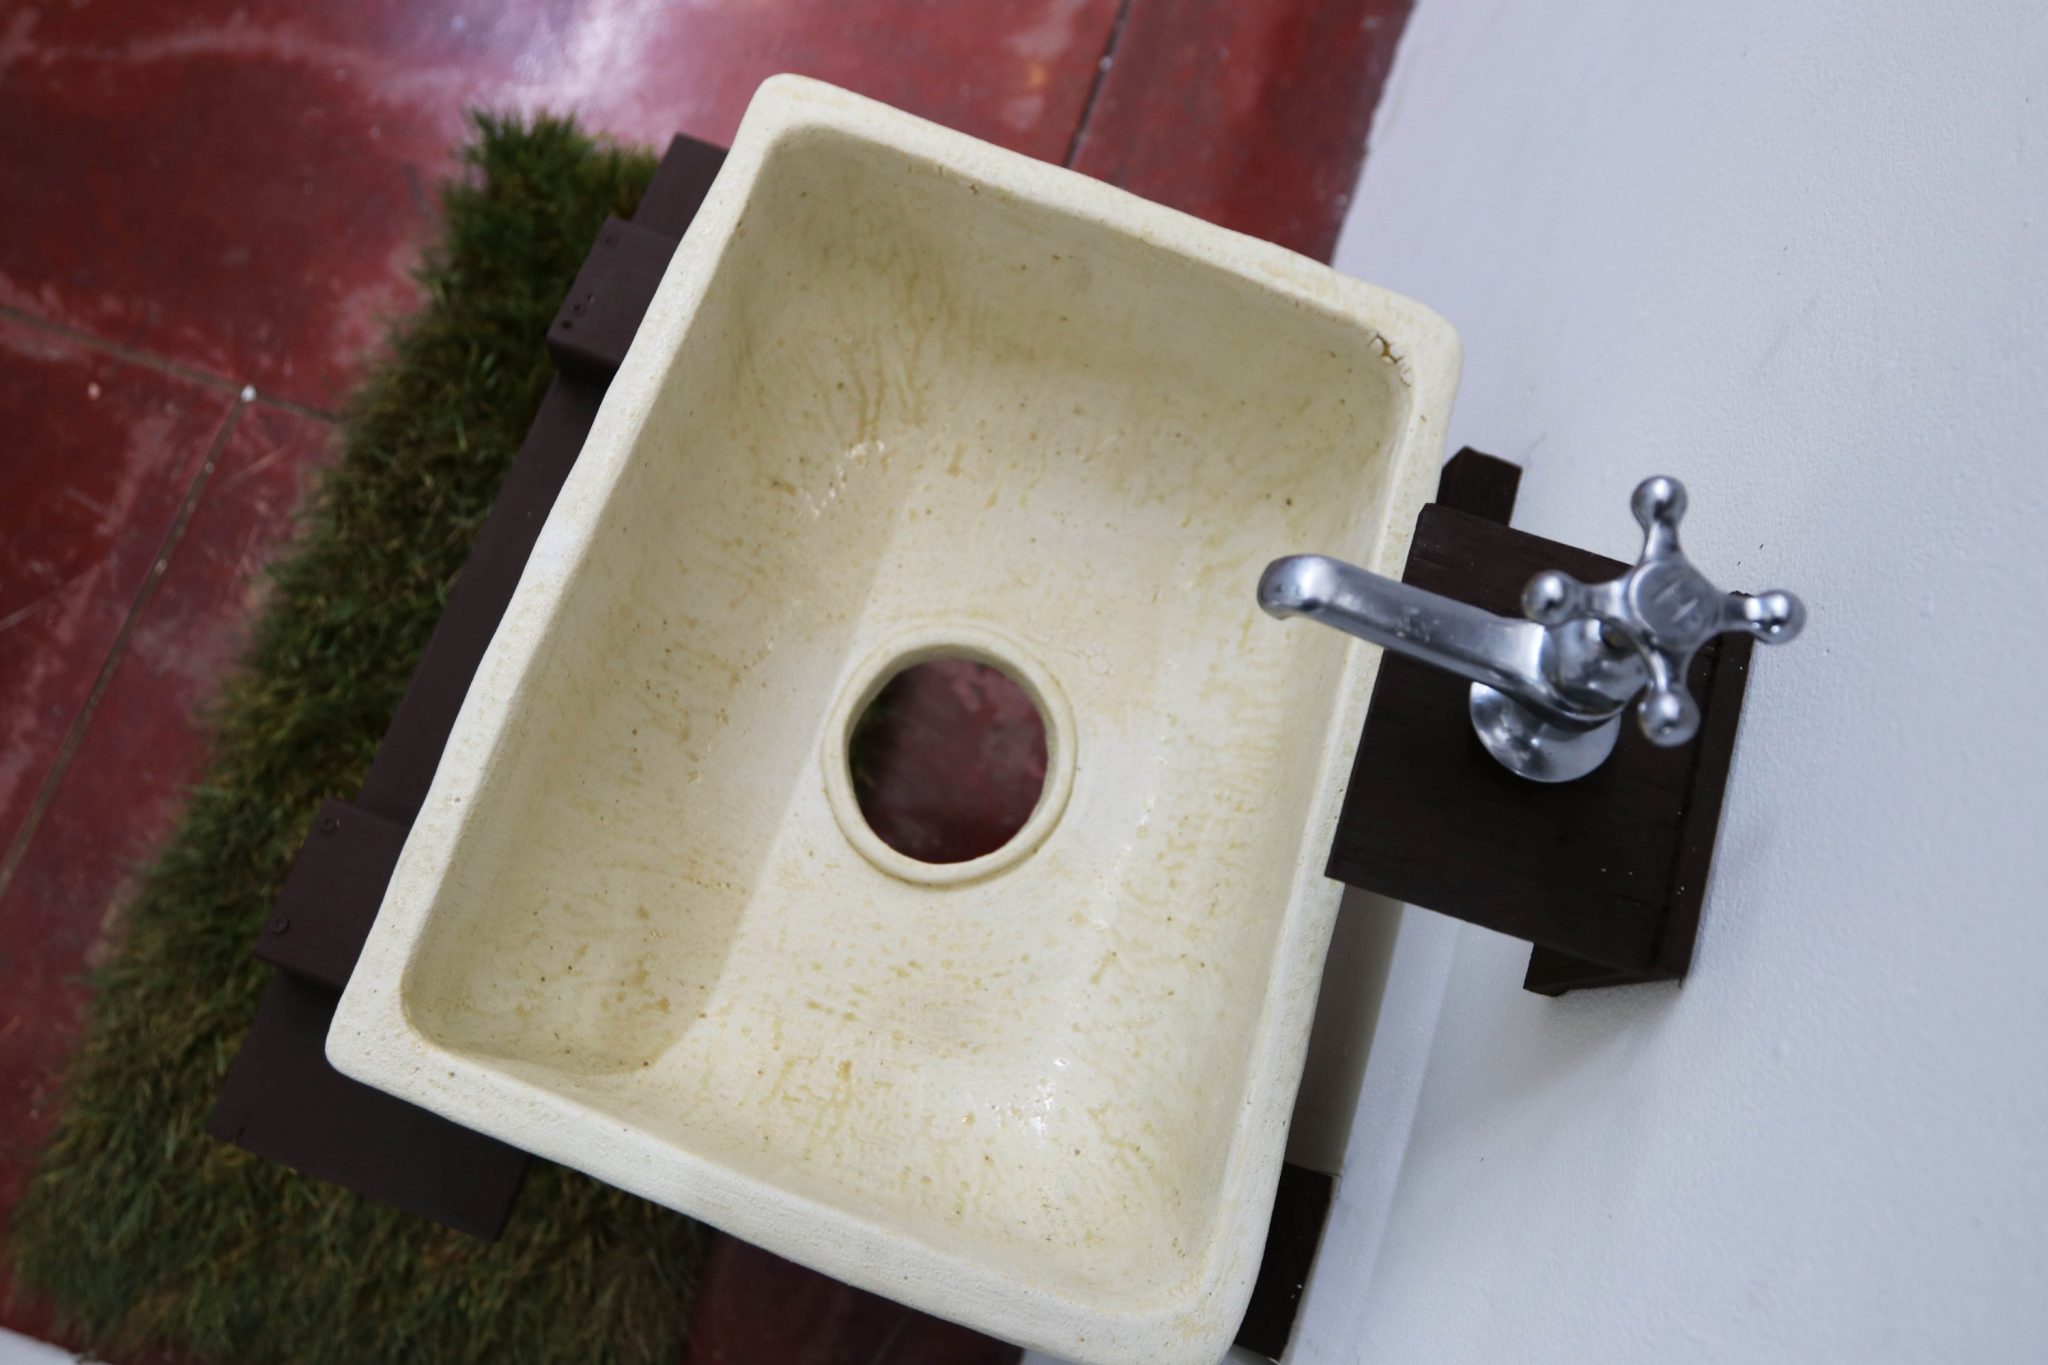 A photo of art from "Age Ingrained" showing an overhead view of a bathroom faucet and sink